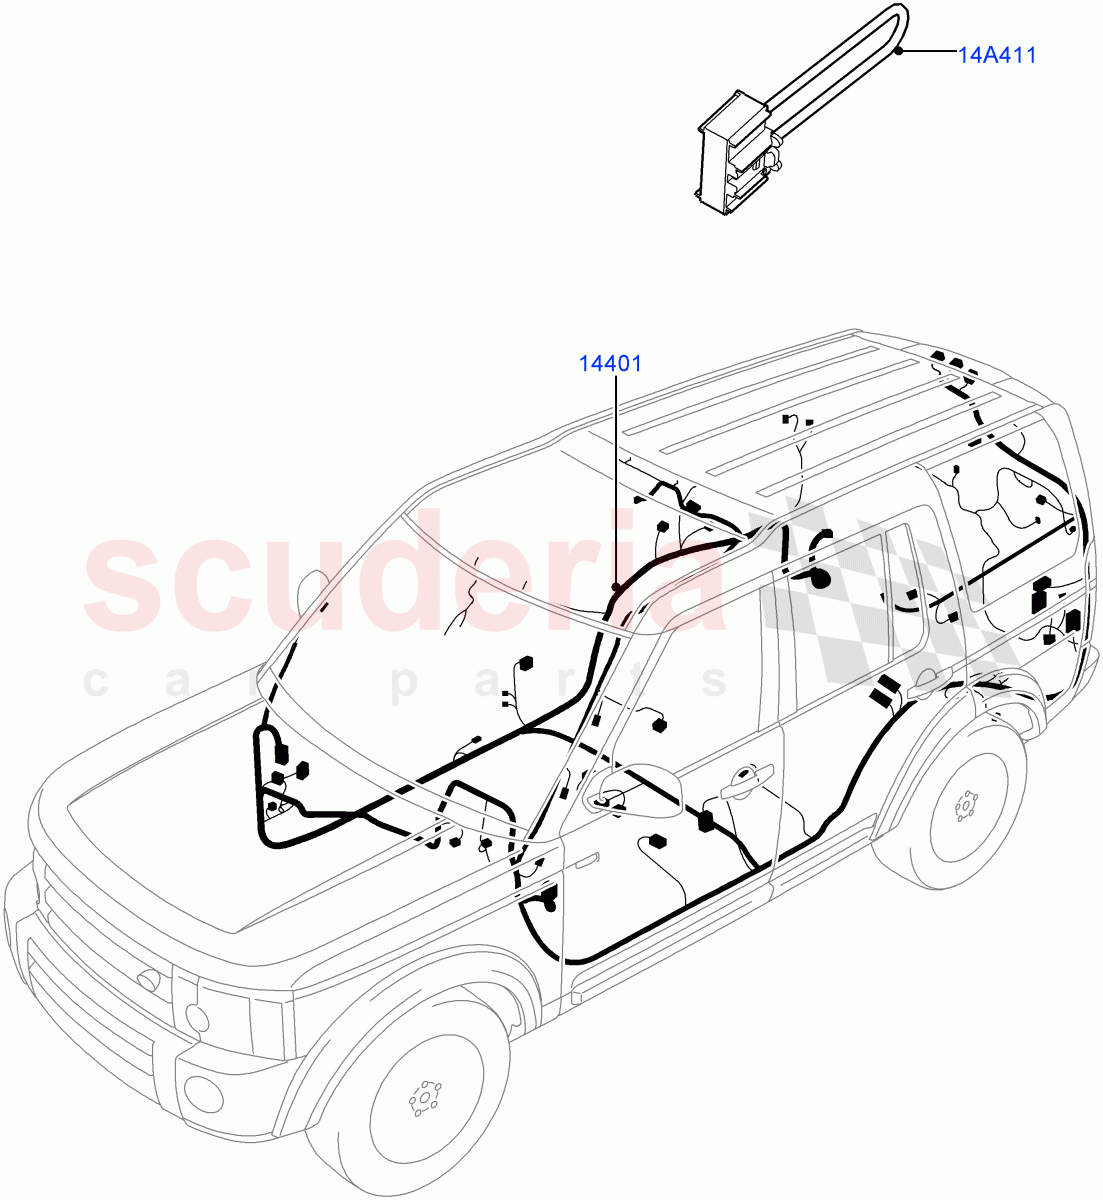 Electrical Wiring - Engine And Dash(Main Harness)((V)FROMCA000001,(V)TOFA999999) of Land Rover Land Rover Discovery 4 (2010-2016) [4.0 Petrol V6]